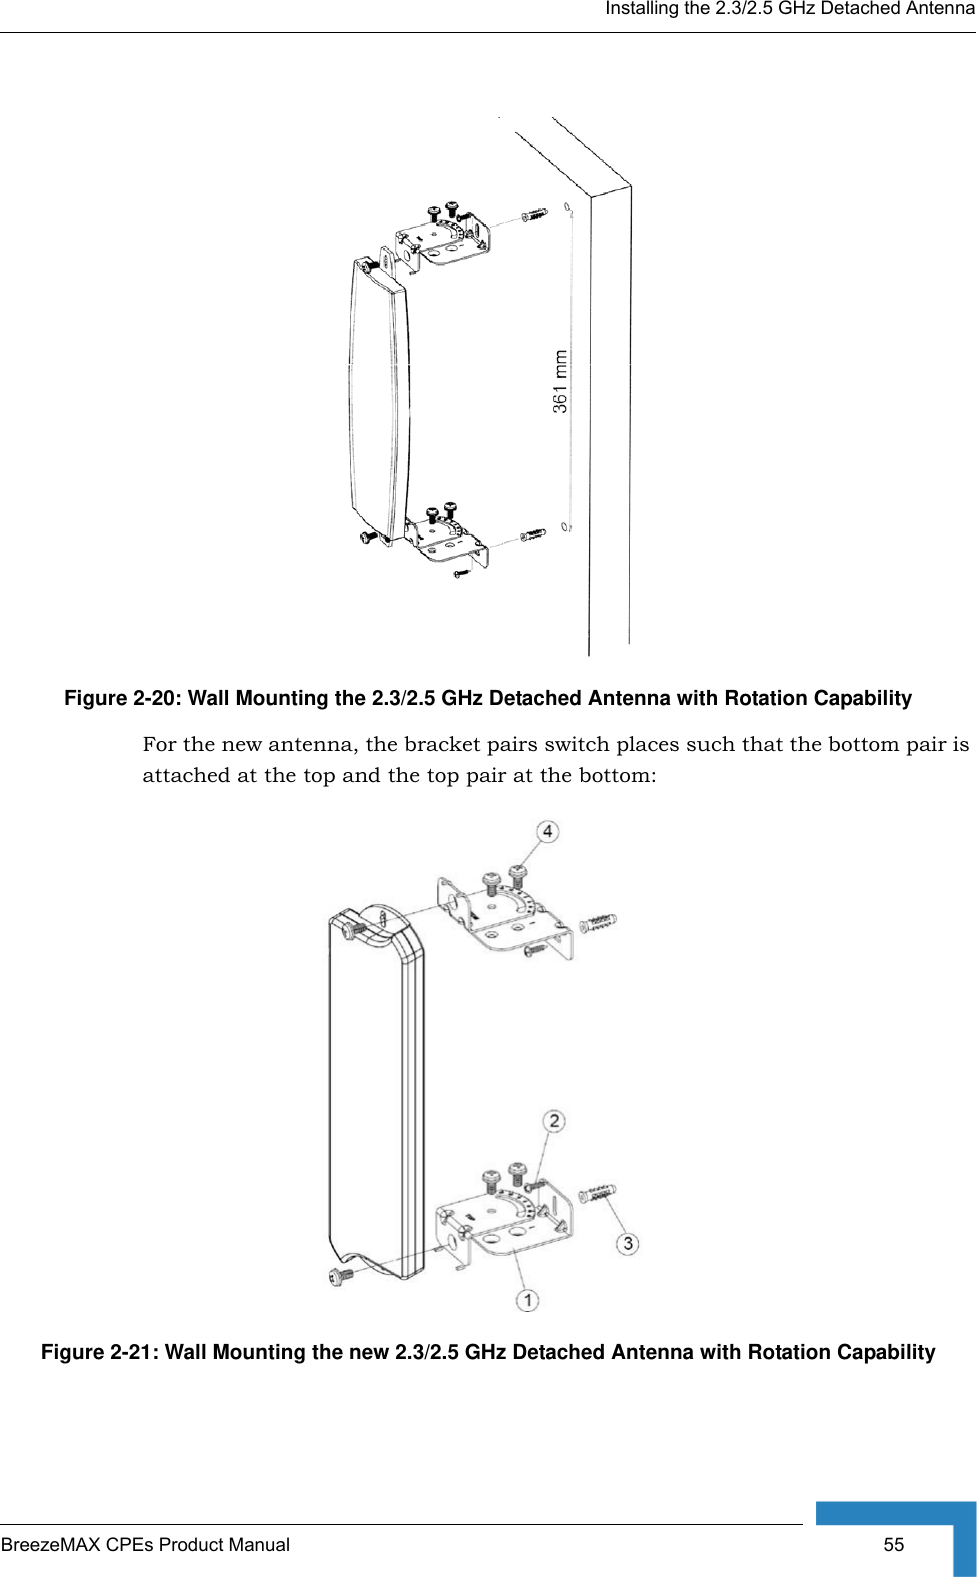 Installing the 2.3/2.5 GHz Detached AntennaBreezeMAX CPEs Product Manual  55For the new antenna, the bracket pairs switch places such that the bottom pair is attached at the top and the top pair at the bottom:Figure 2-20: Wall Mounting the 2.3/2.5 GHz Detached Antenna with Rotation CapabilityFigure 2-21: Wall Mounting the new 2.3/2.5 GHz Detached Antenna with Rotation Capability